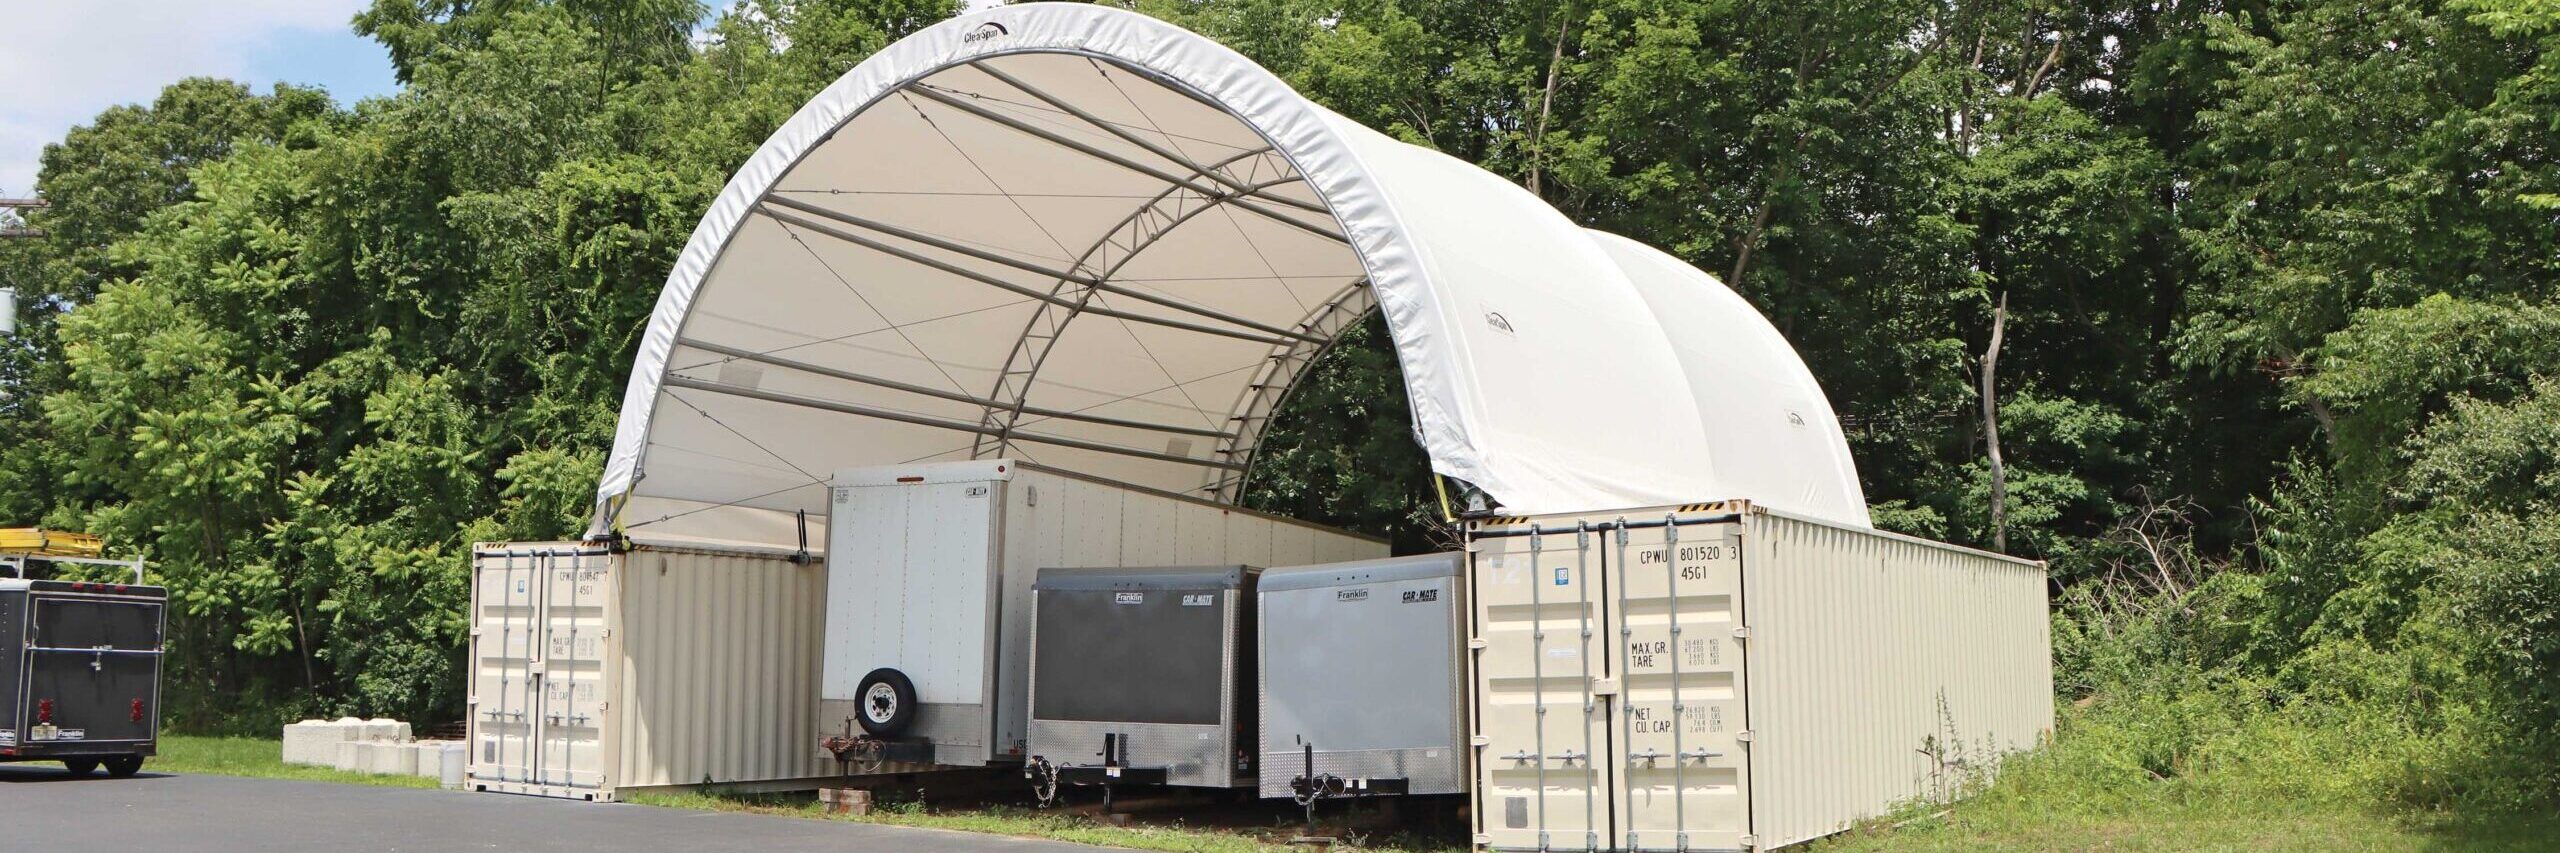 fabric tent shed with trailers stored underneath